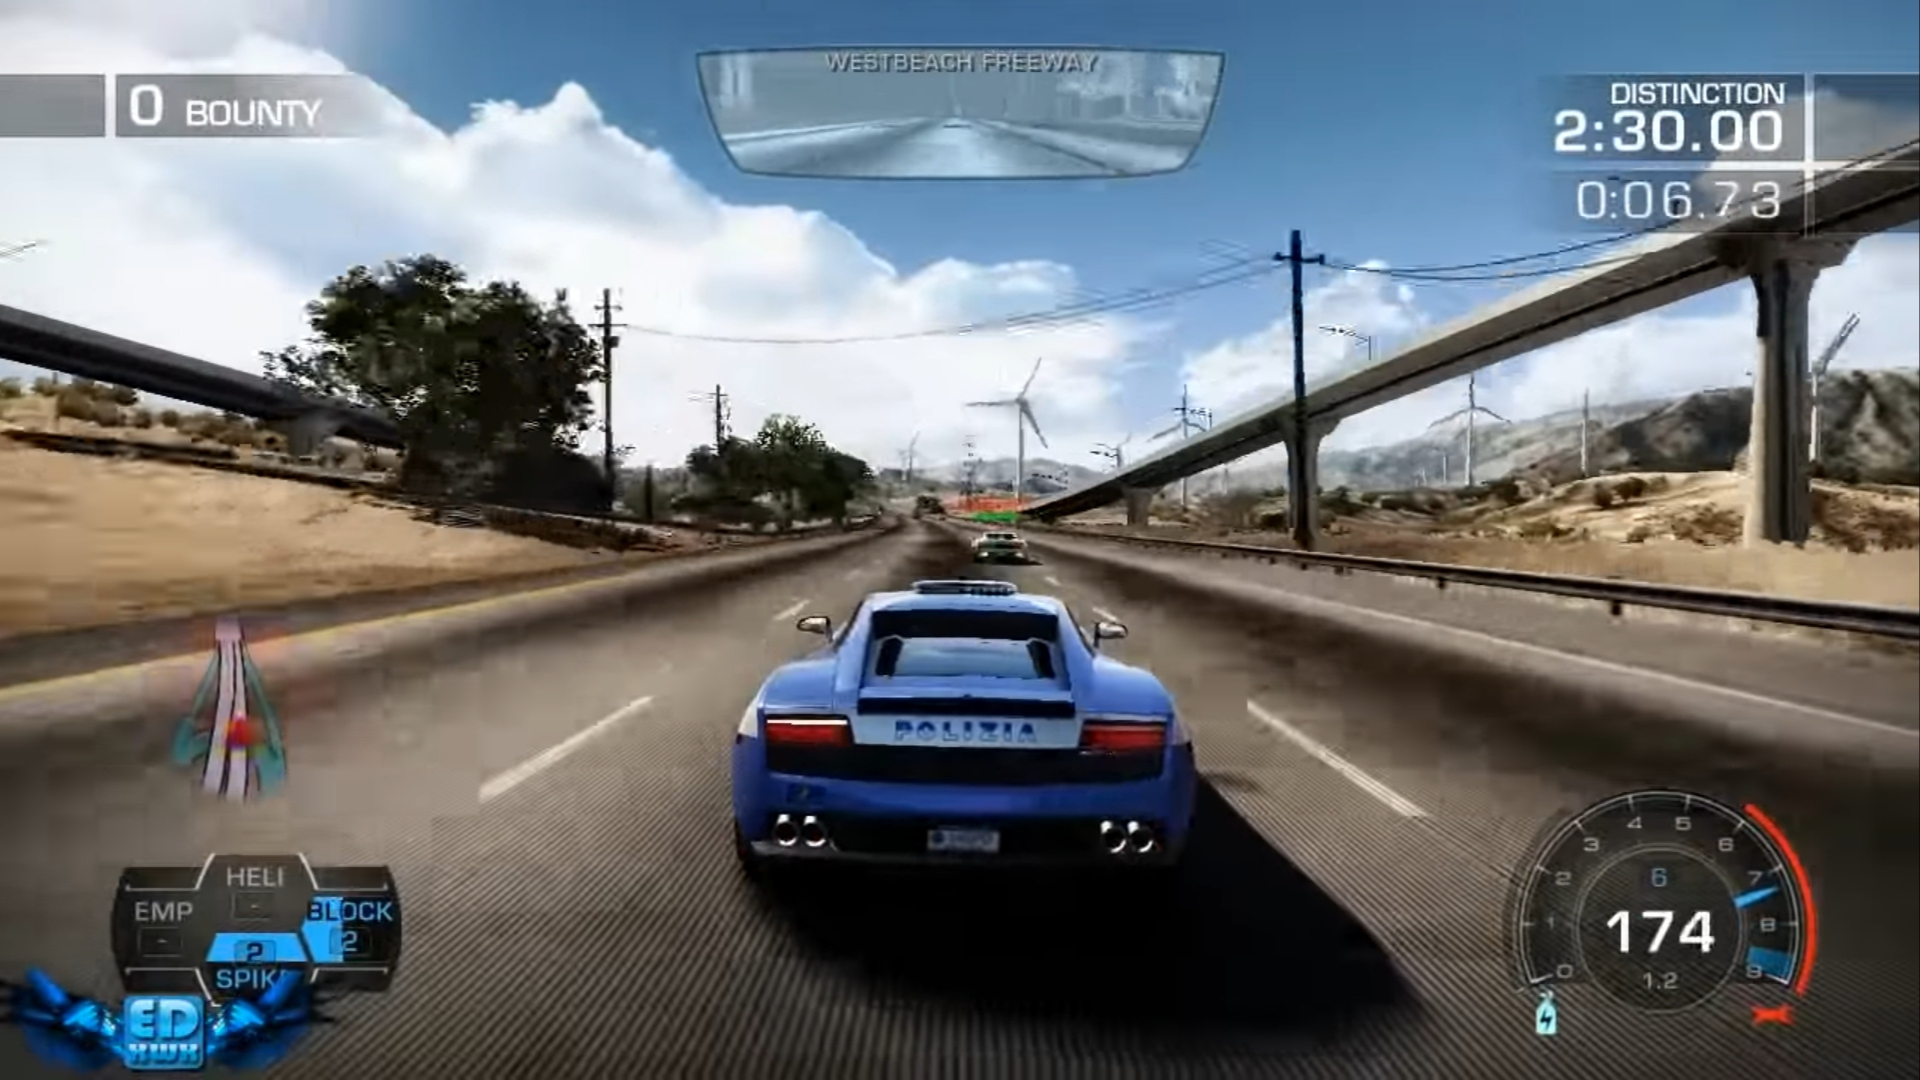 NFS Hot Pursuit Highly Compressed